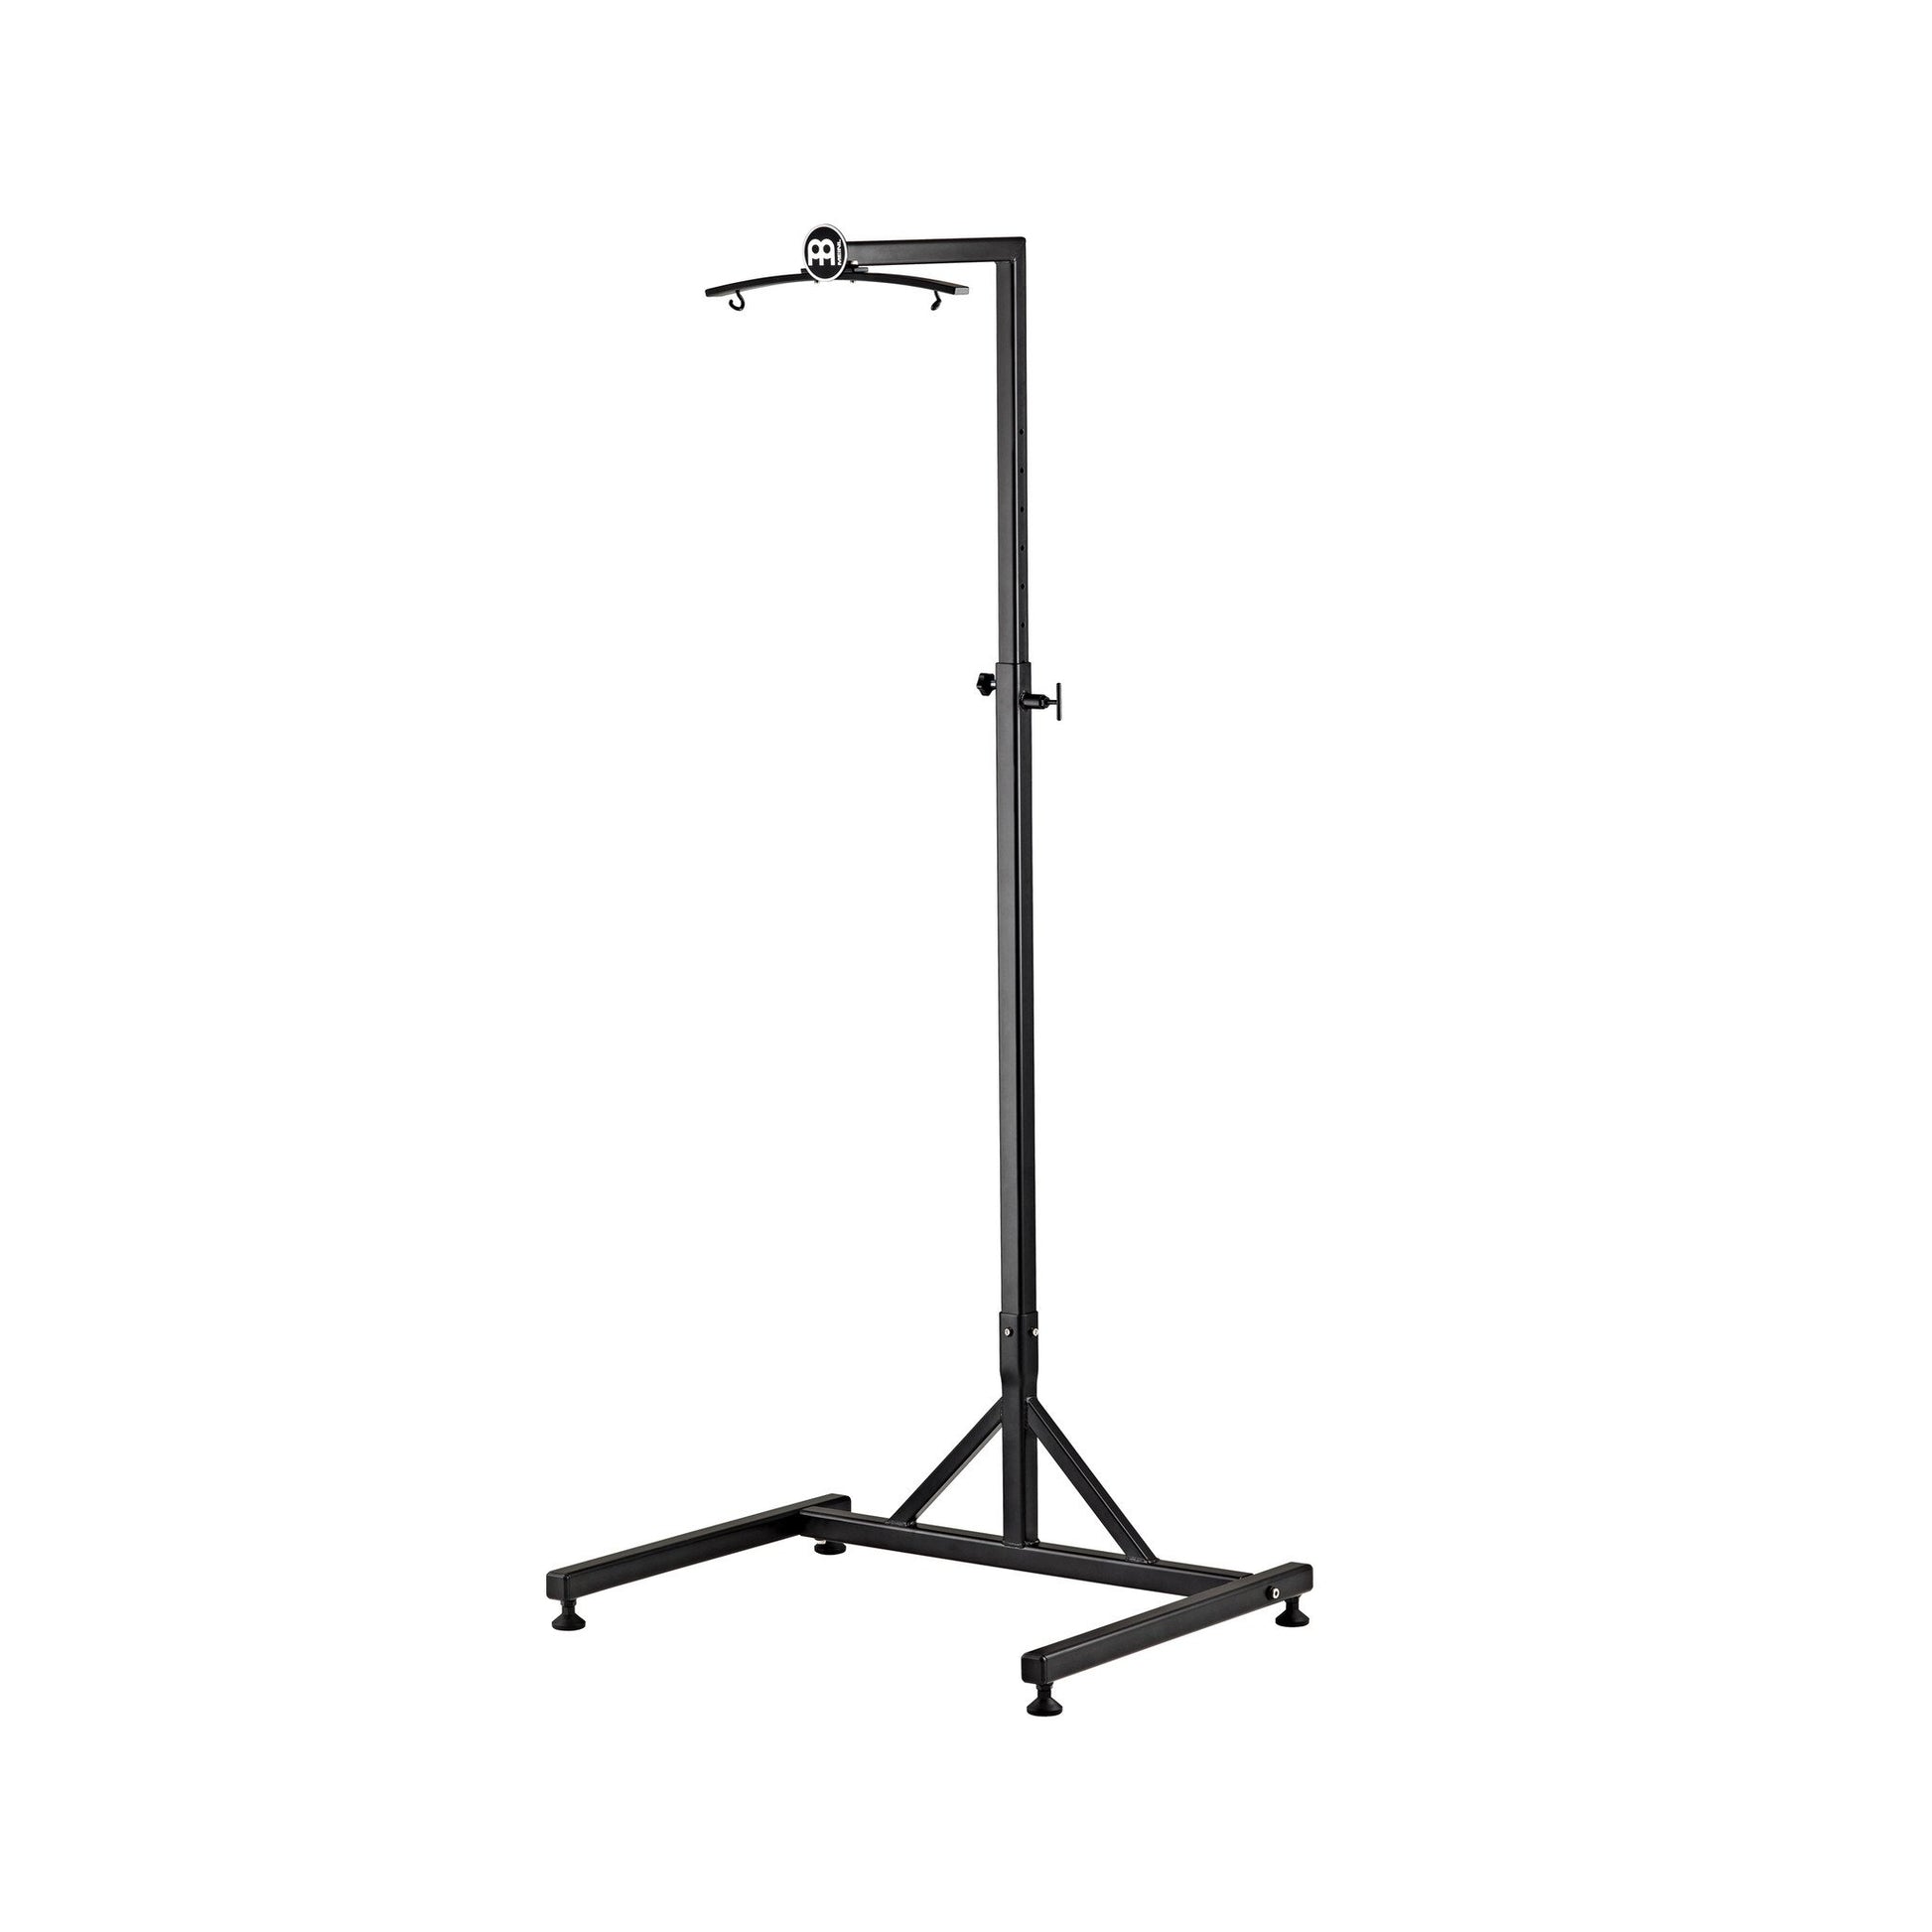 Meinl Gong Stands Meinl TMGS Gong Stand - for gongs up to 32"